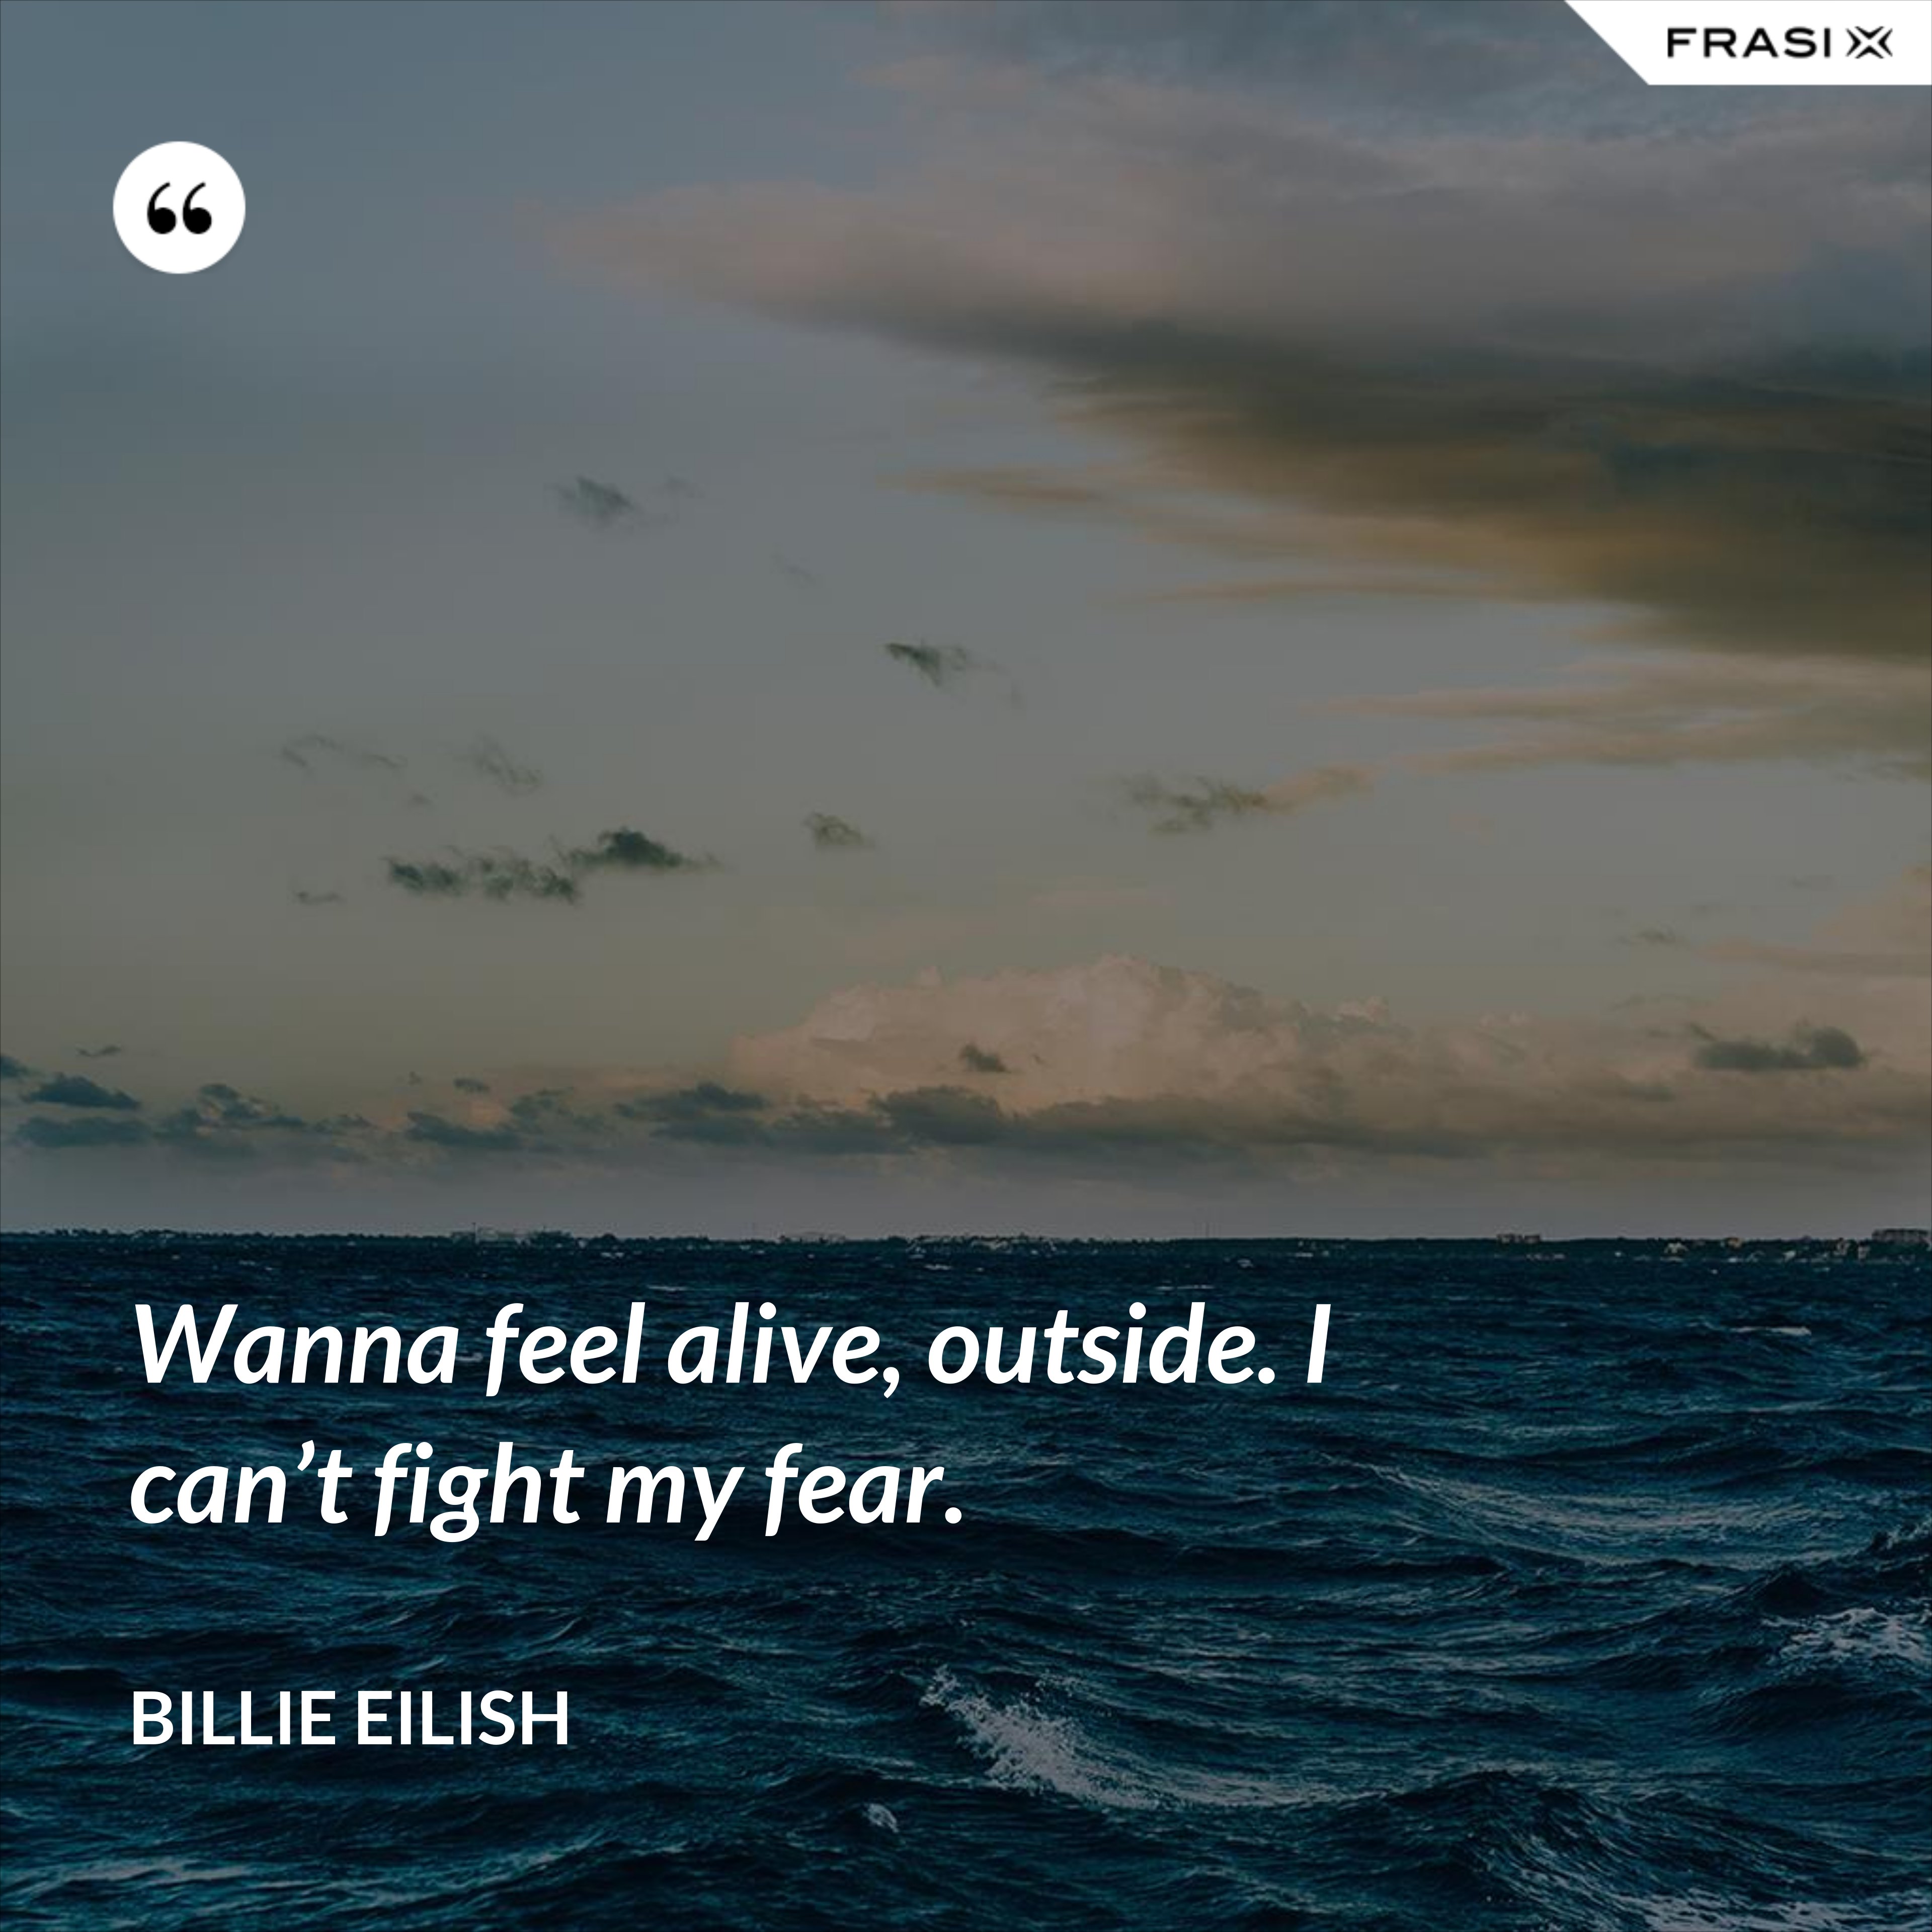 Wanna feel alive, outside. I can’t fight my fear. - Billie Eilish